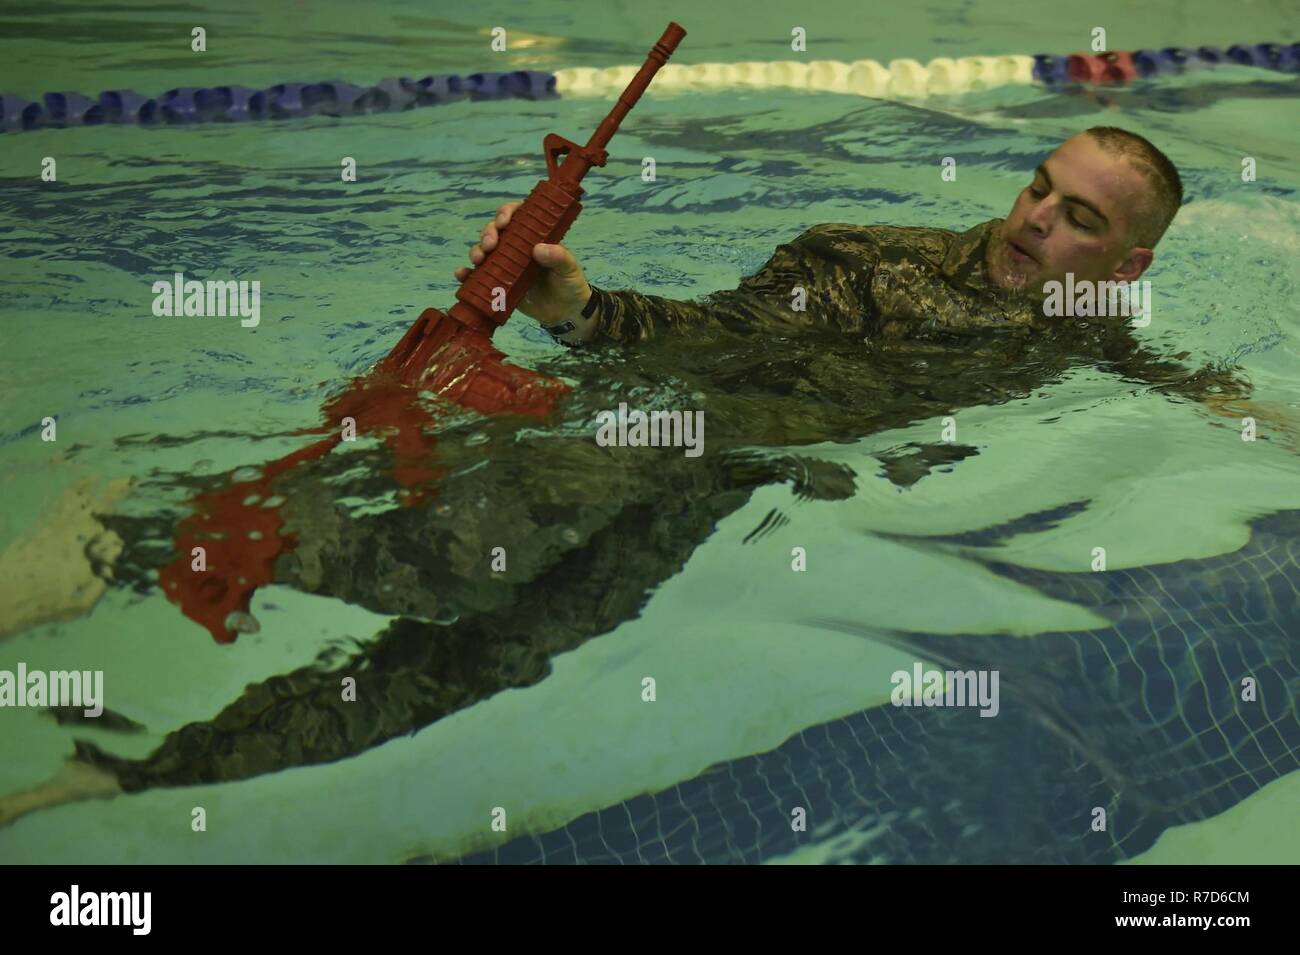 U.S. Air Force Tech. Sgt. George Daggett, 633rd Security Forces Squadron swing shift flight chief, performs a recovery swim during a training evolution at Joint Base Langley-Eustis, Va., April 28, 2017. The 633rd SFS Emergency Services Team conducted a test trial for a course future candidates will have to accomplish in order to join the EST ranks. Stock Photo